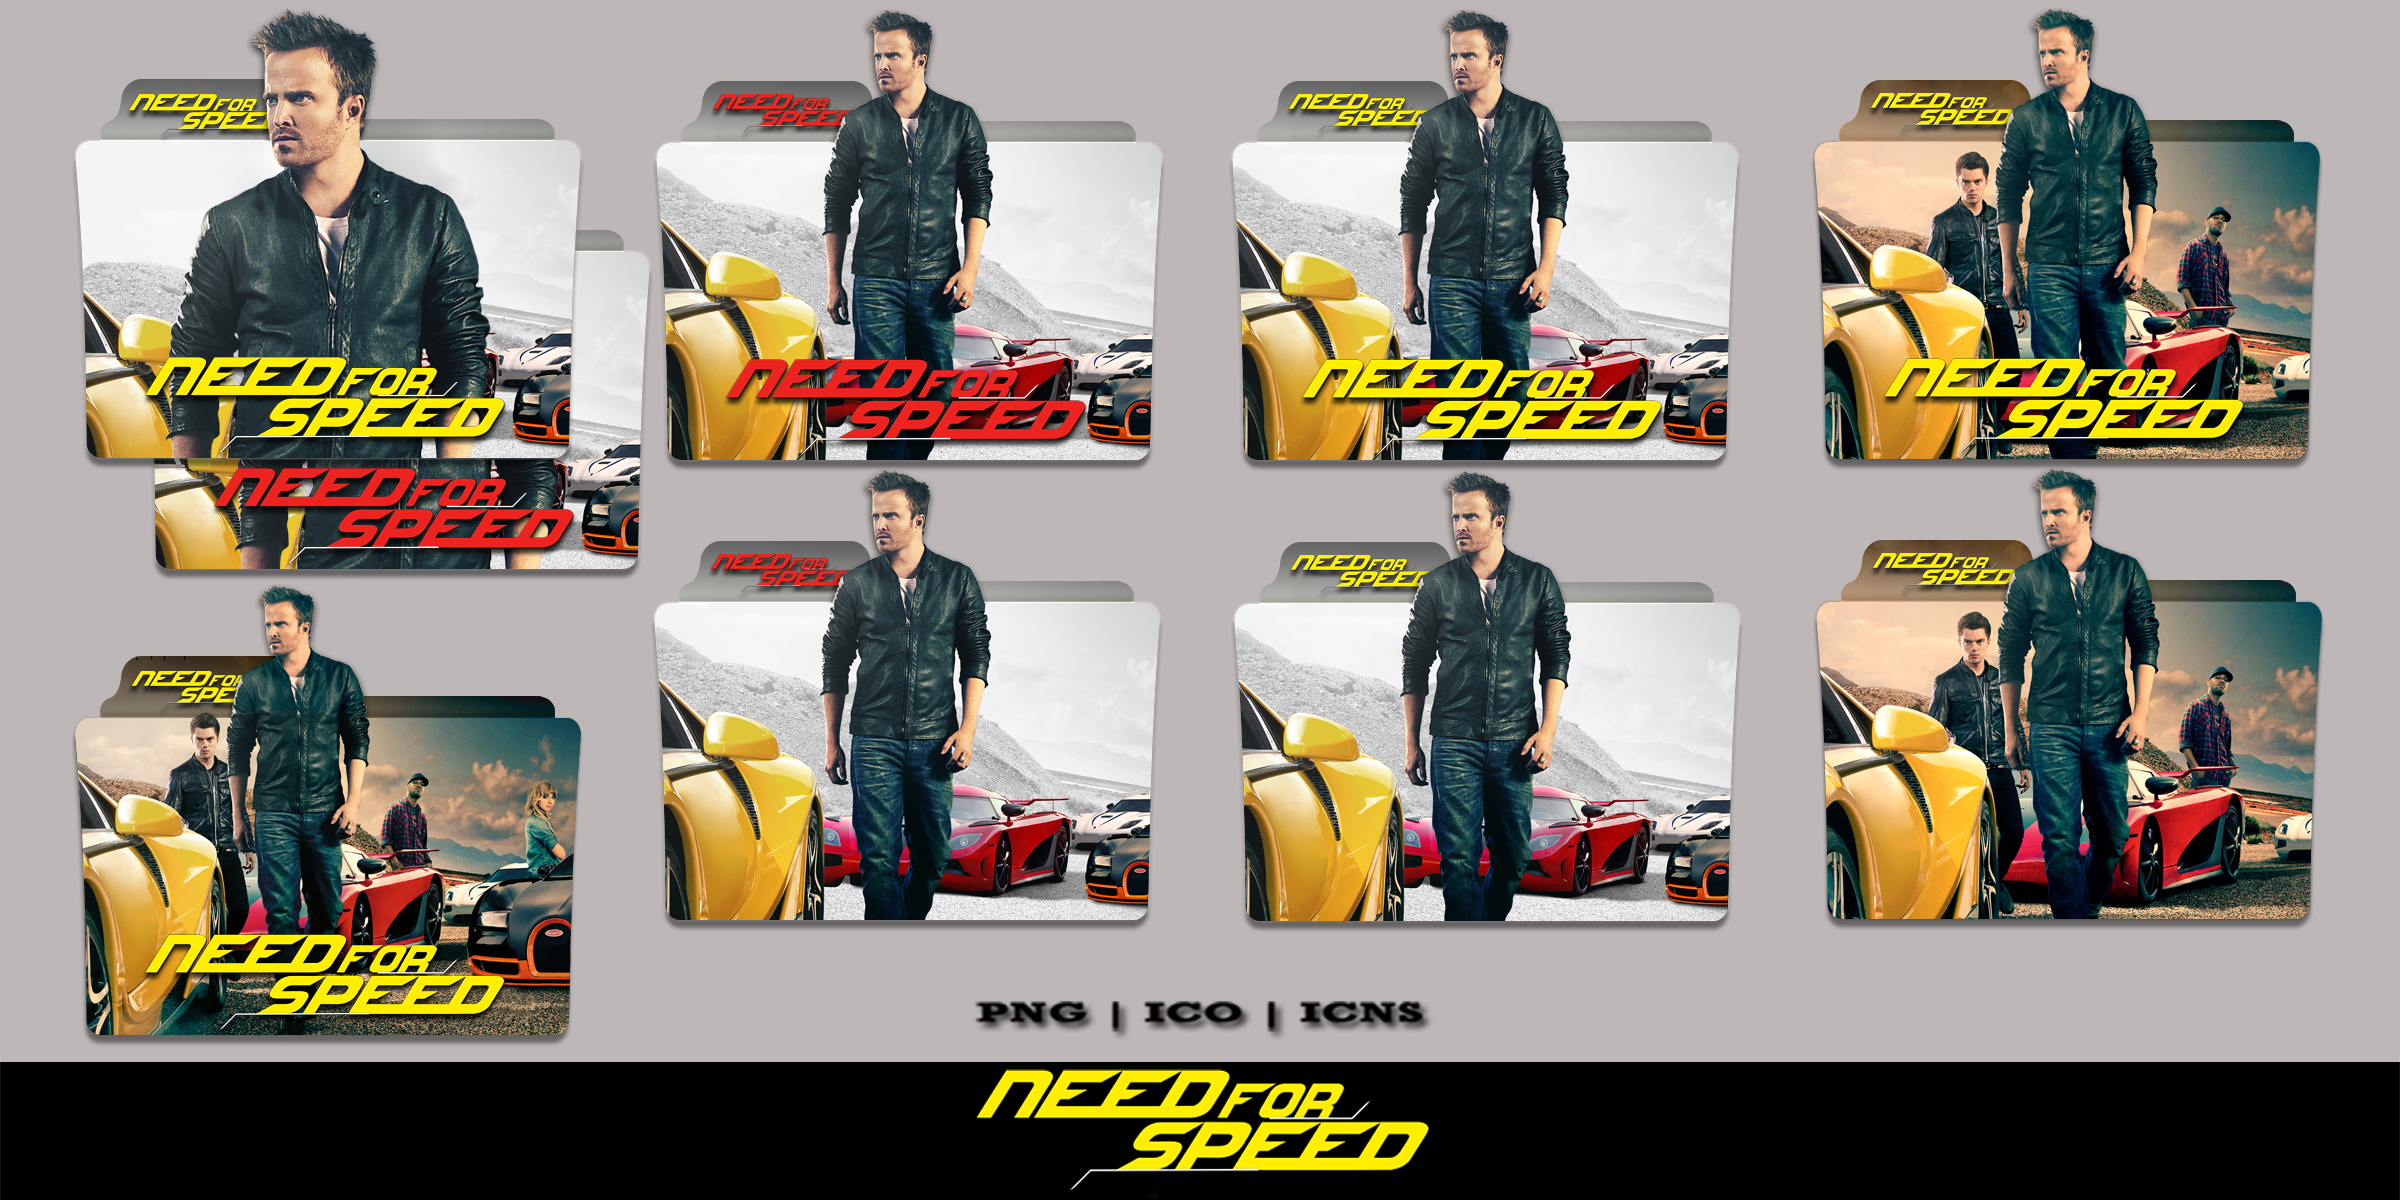 Need For Speed 2015 Original DVD Cover by Anushofficial on DeviantArt